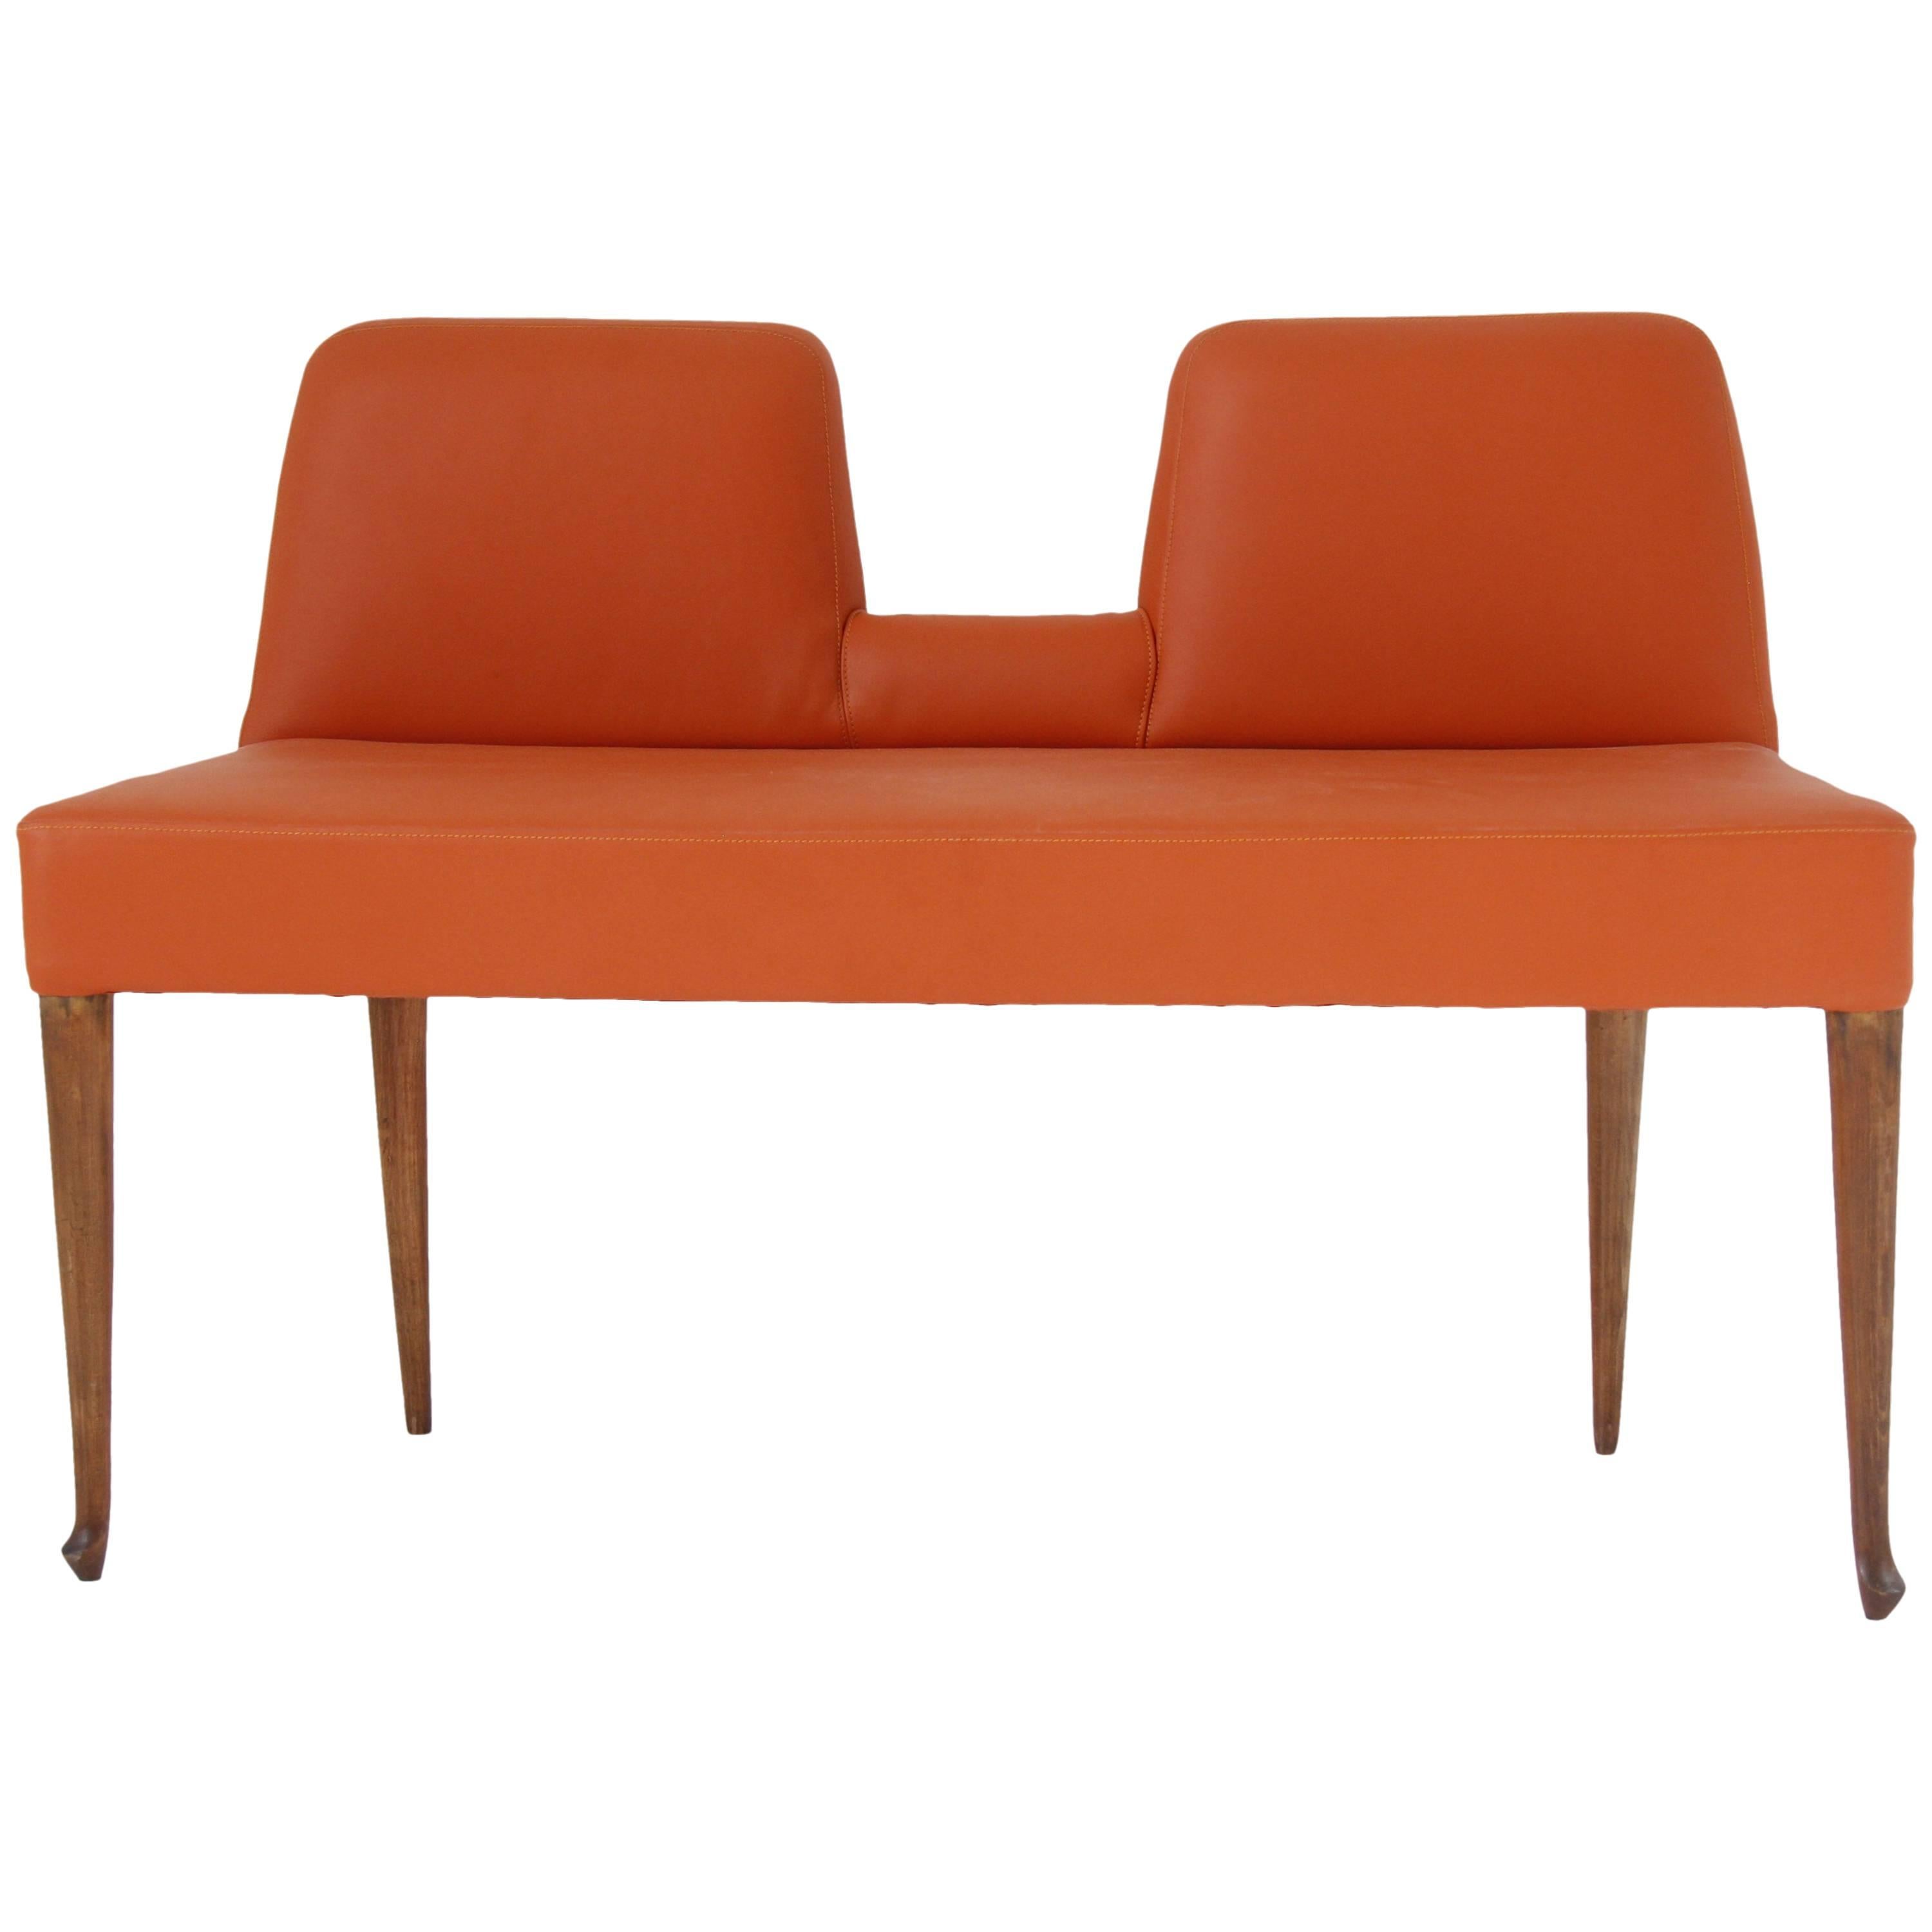 Vintage Italian Orange Leather Bench with Low Back, circa 1960 For Sale